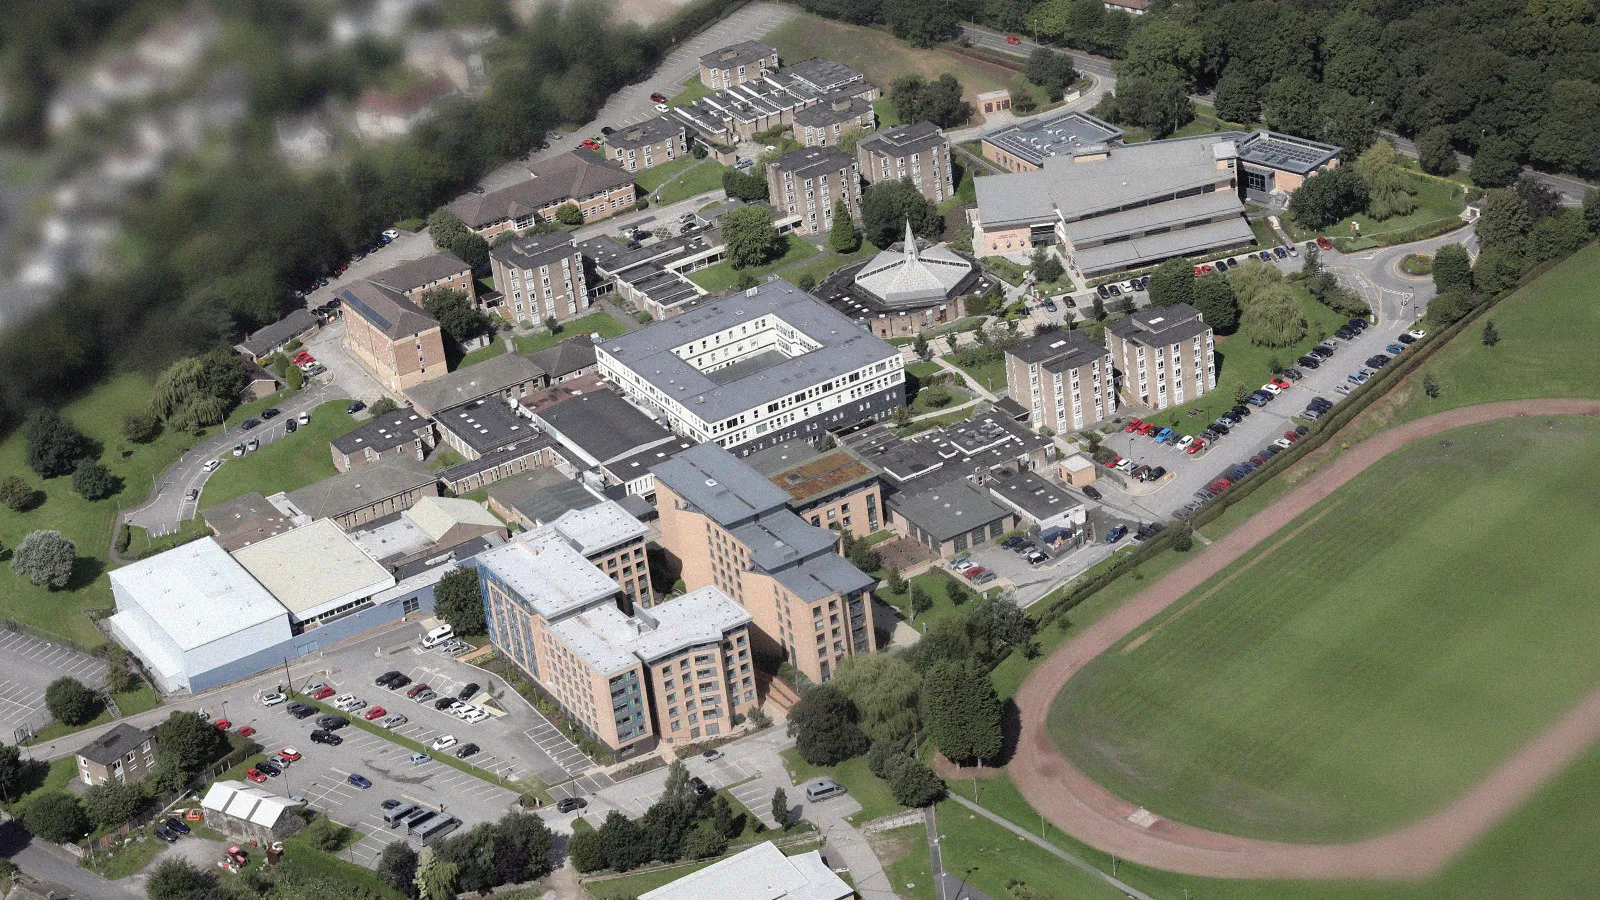 An aerial view of Leeds Trinity University campus.